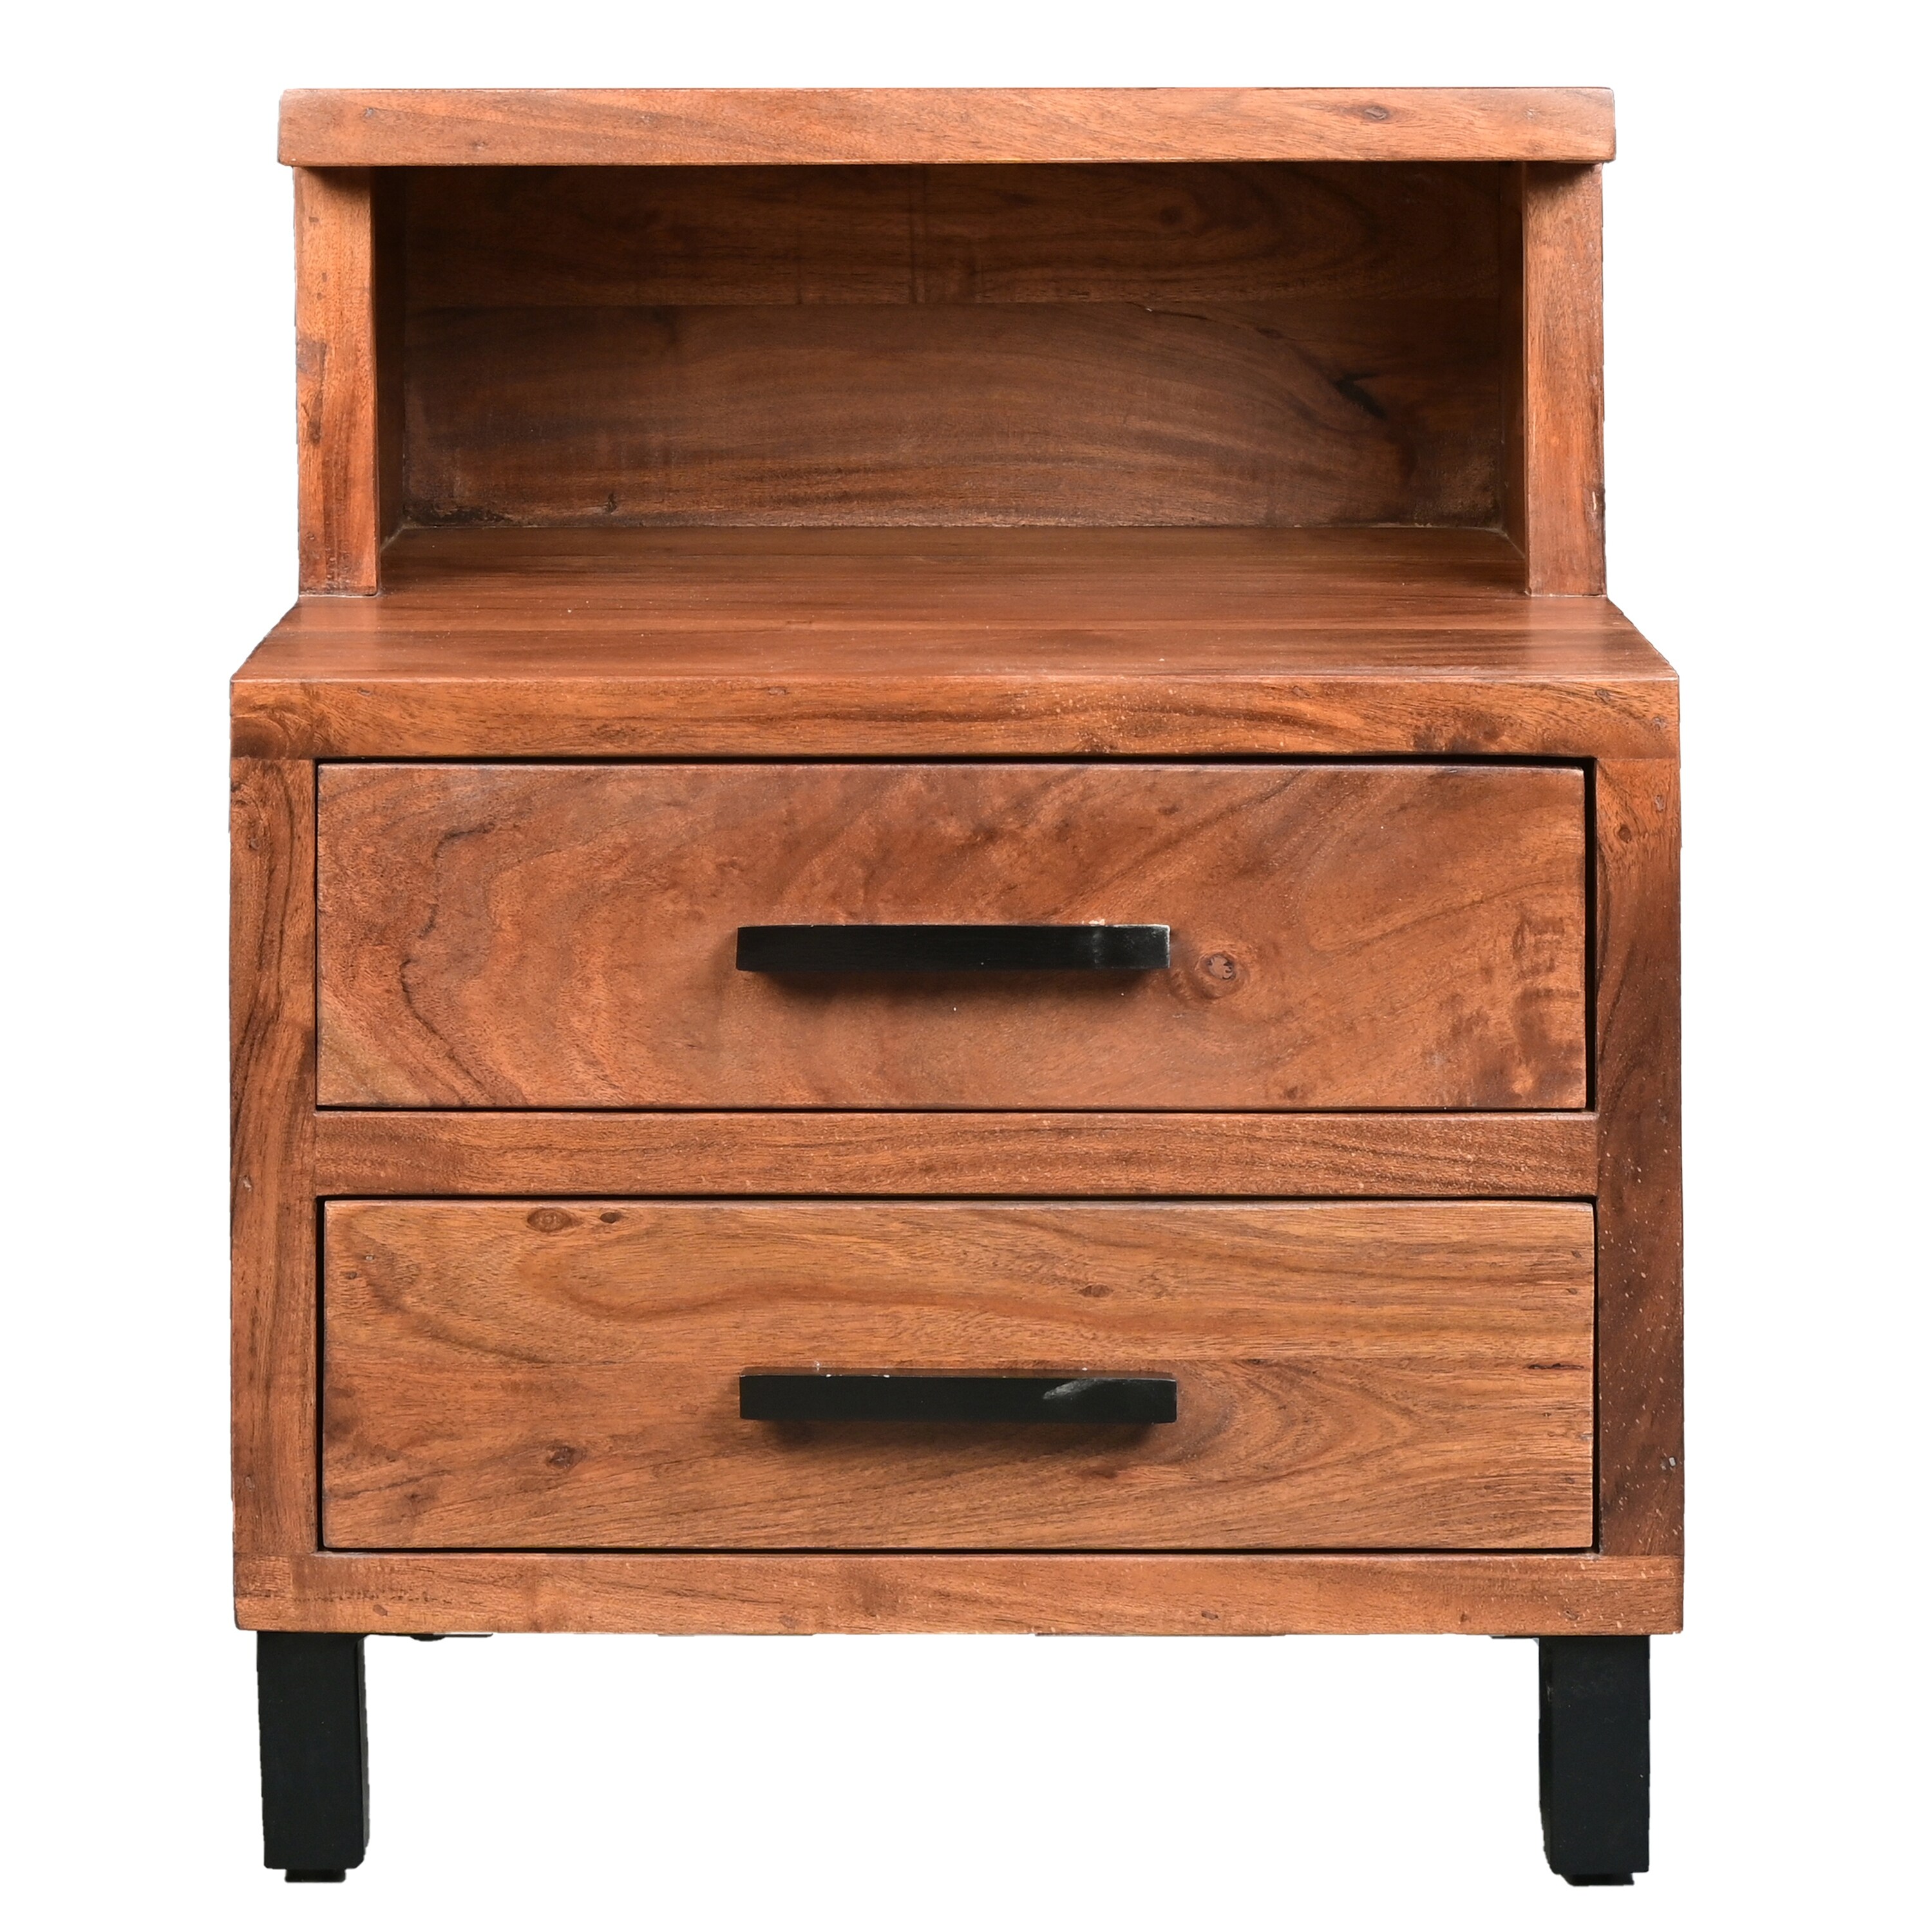 22 Inch Acacia Wood Nightstand, Bedside Table with 2 Drawers and Open Cubby, Walnut Brown - image 4 of 5